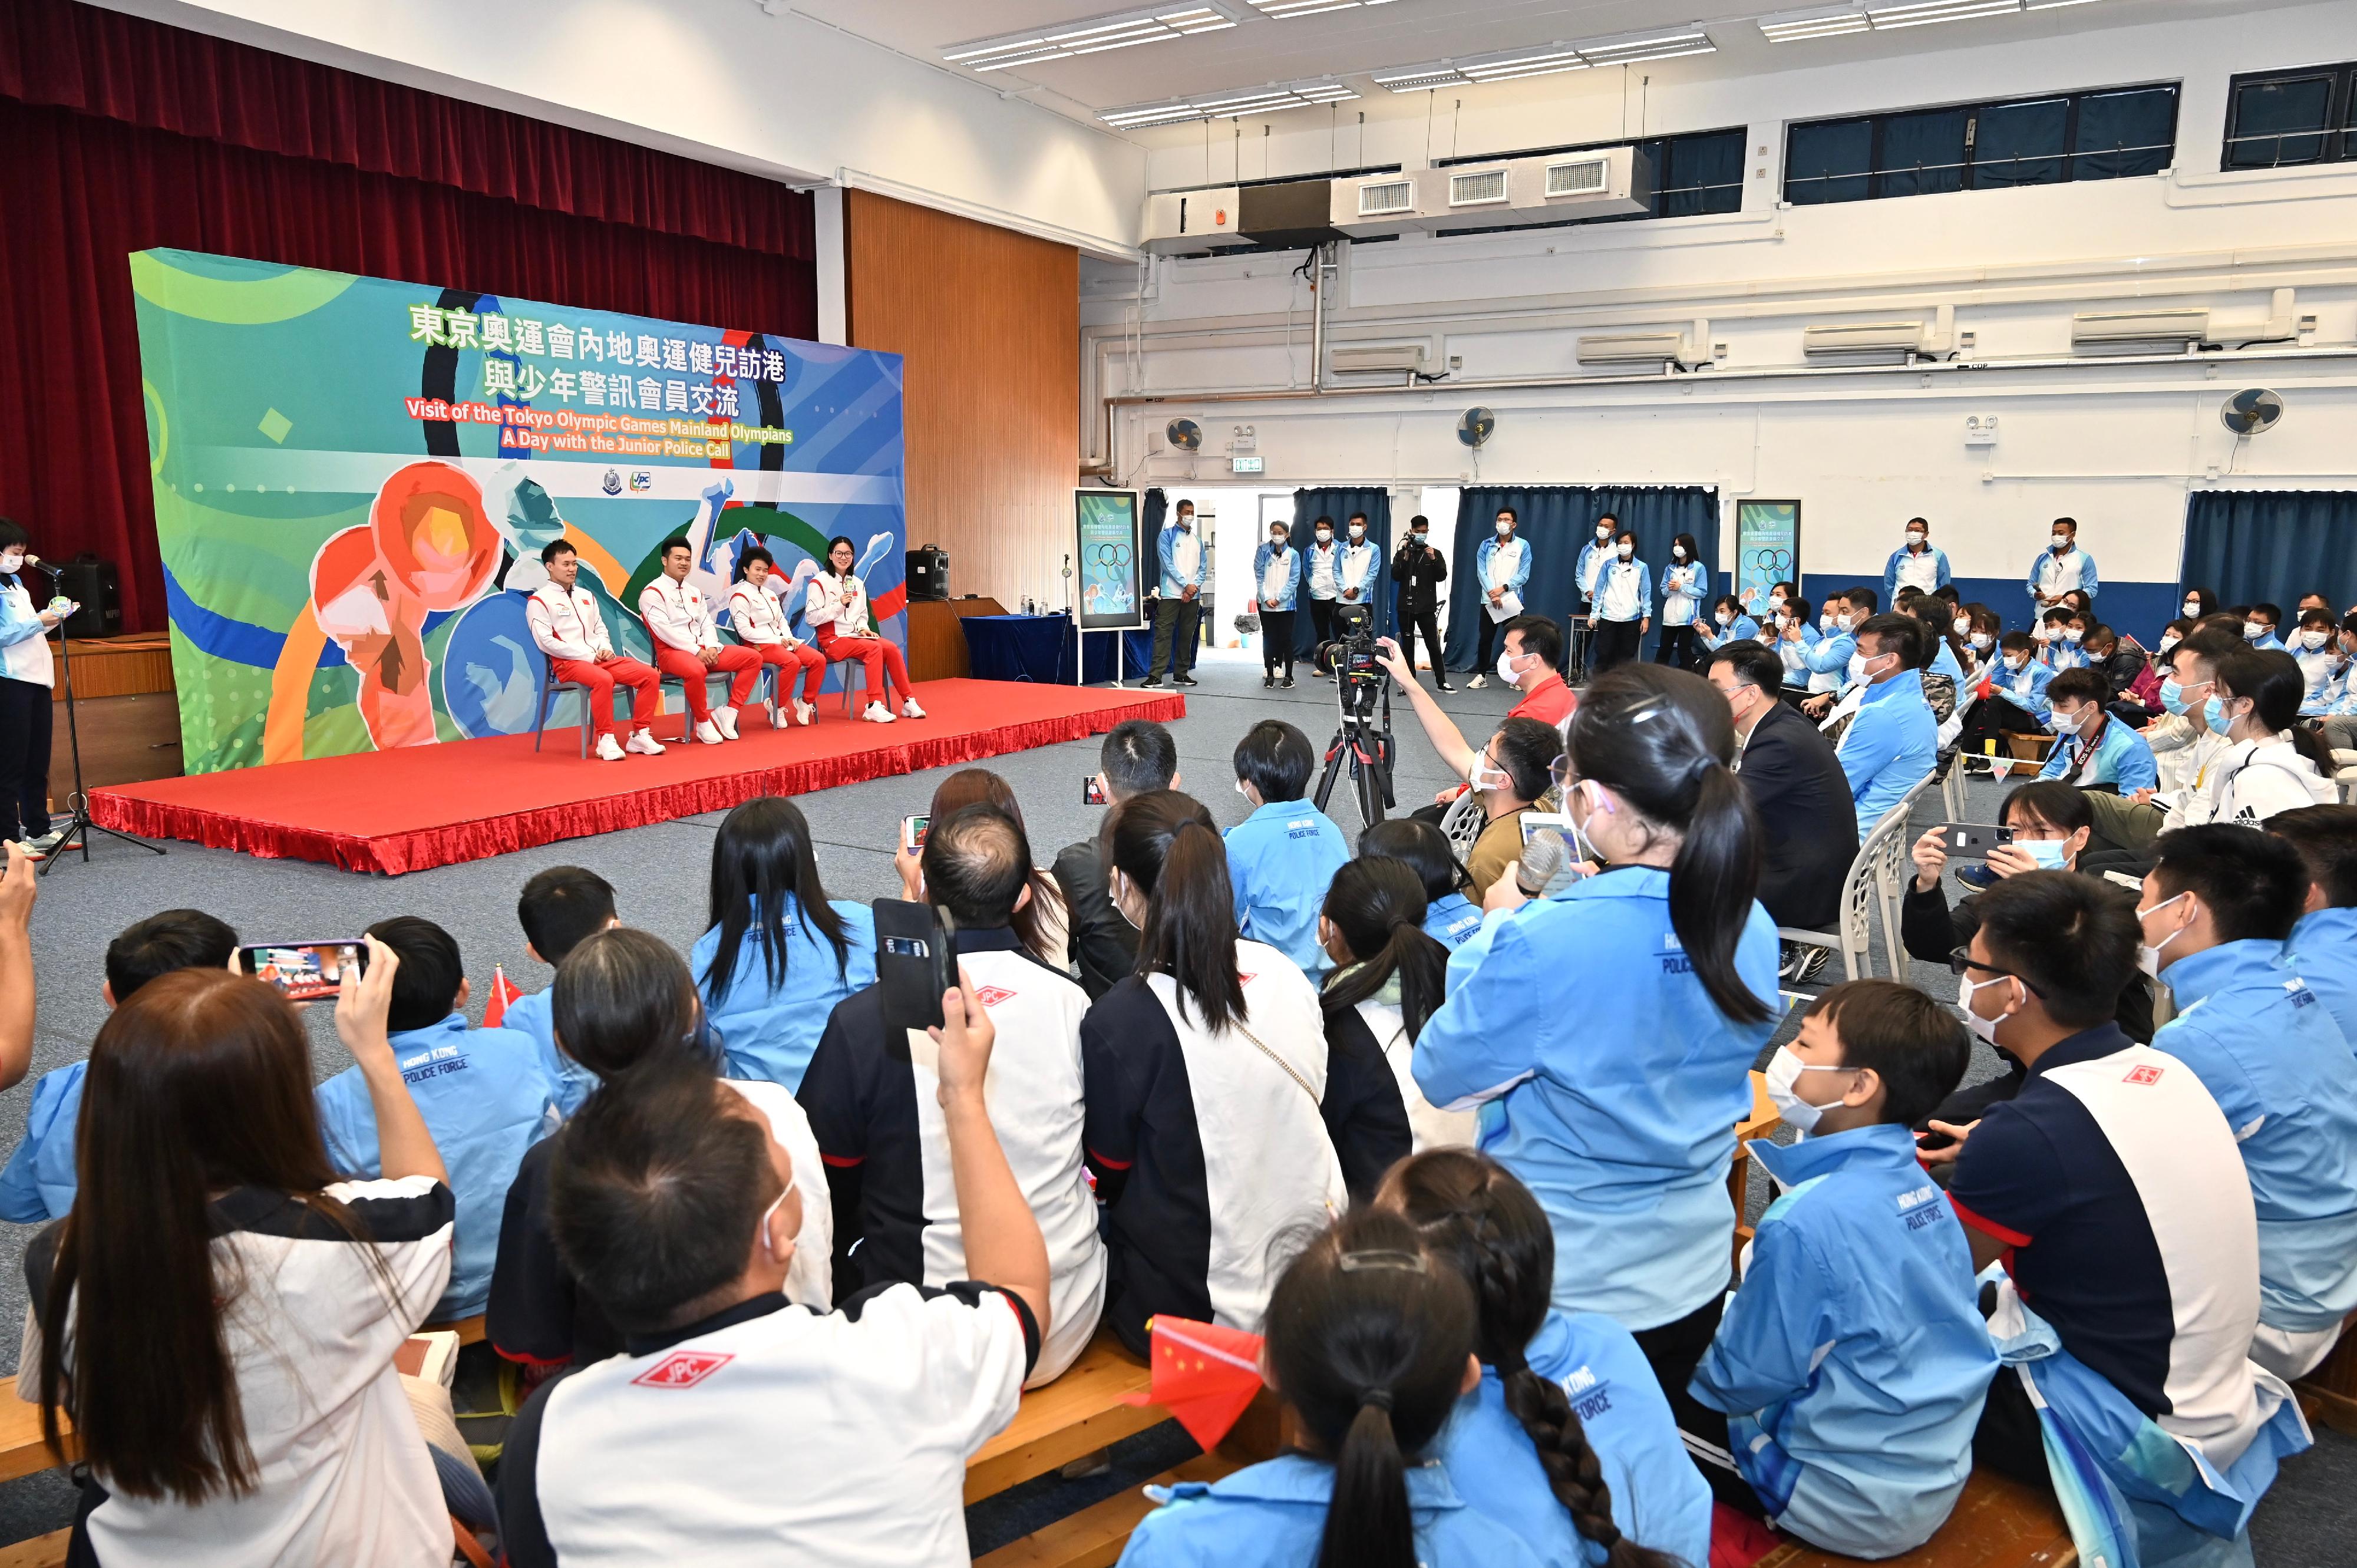 Four athlete representatives from the delegation of Tokyo 2020 Olympic Games Mainland Olympians, who arrived in Hong Kong on December 3 for a three-day visit, met with members of Junior Police Call (JPC) at the Hong Kong Police College this morning (December 5). Photo shows Mainland athletes chatting with JPC members.